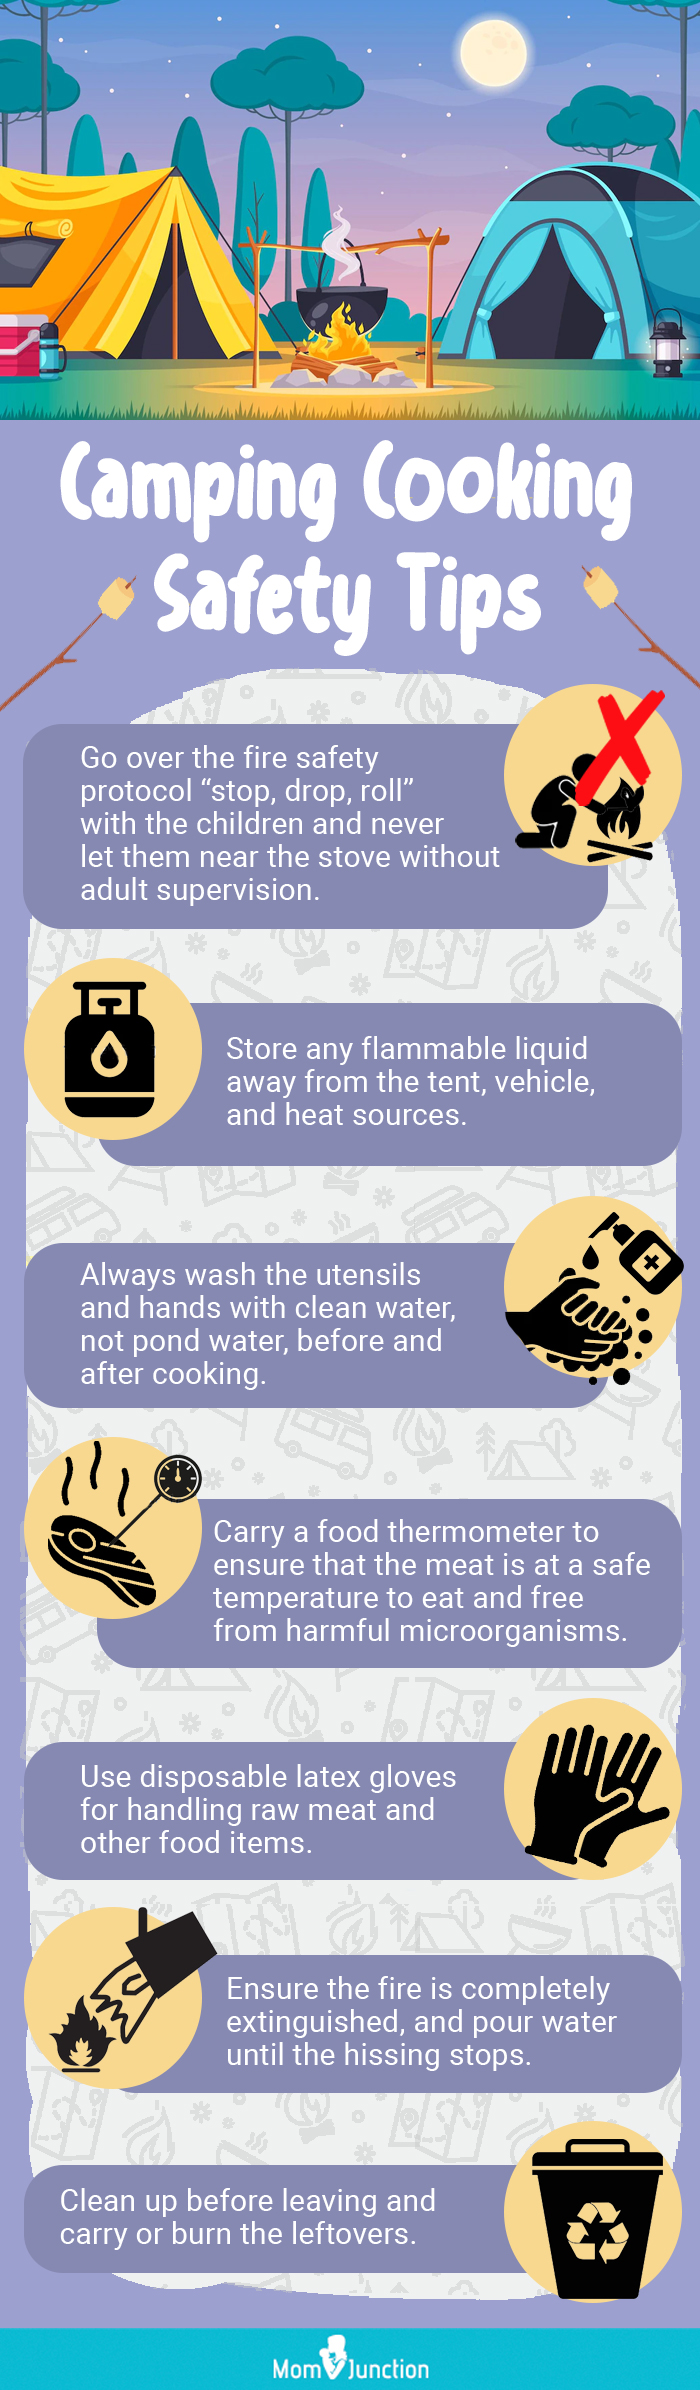 camping cooking safety tips (infographic)